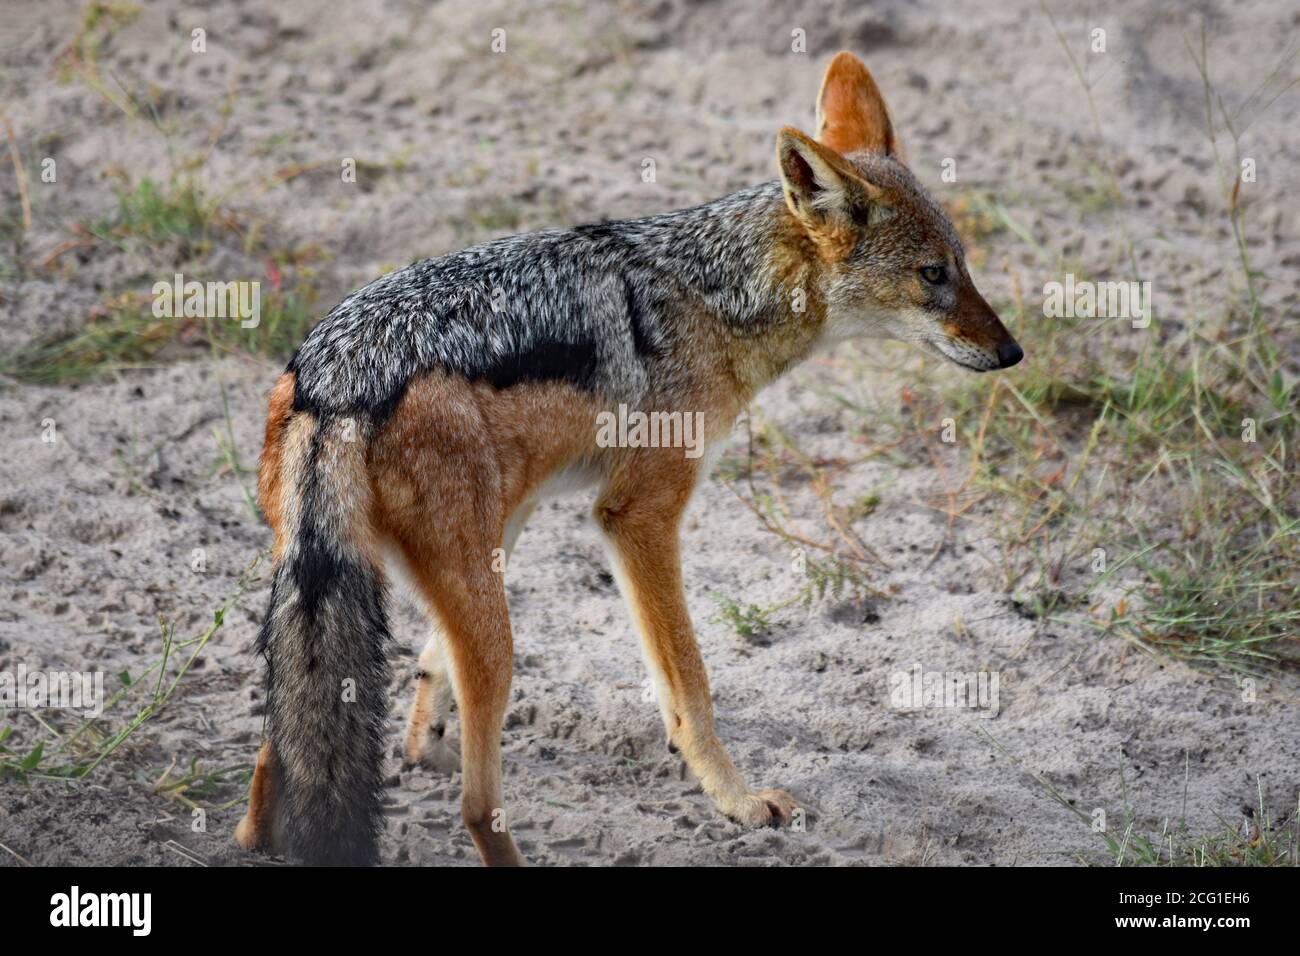 A side view of a Black-Backed Jackal (Canis mesomelas or Lupulella mesomelas) looking away from the camera in Chobe national Park, Botswana, Africa. Stock Photo